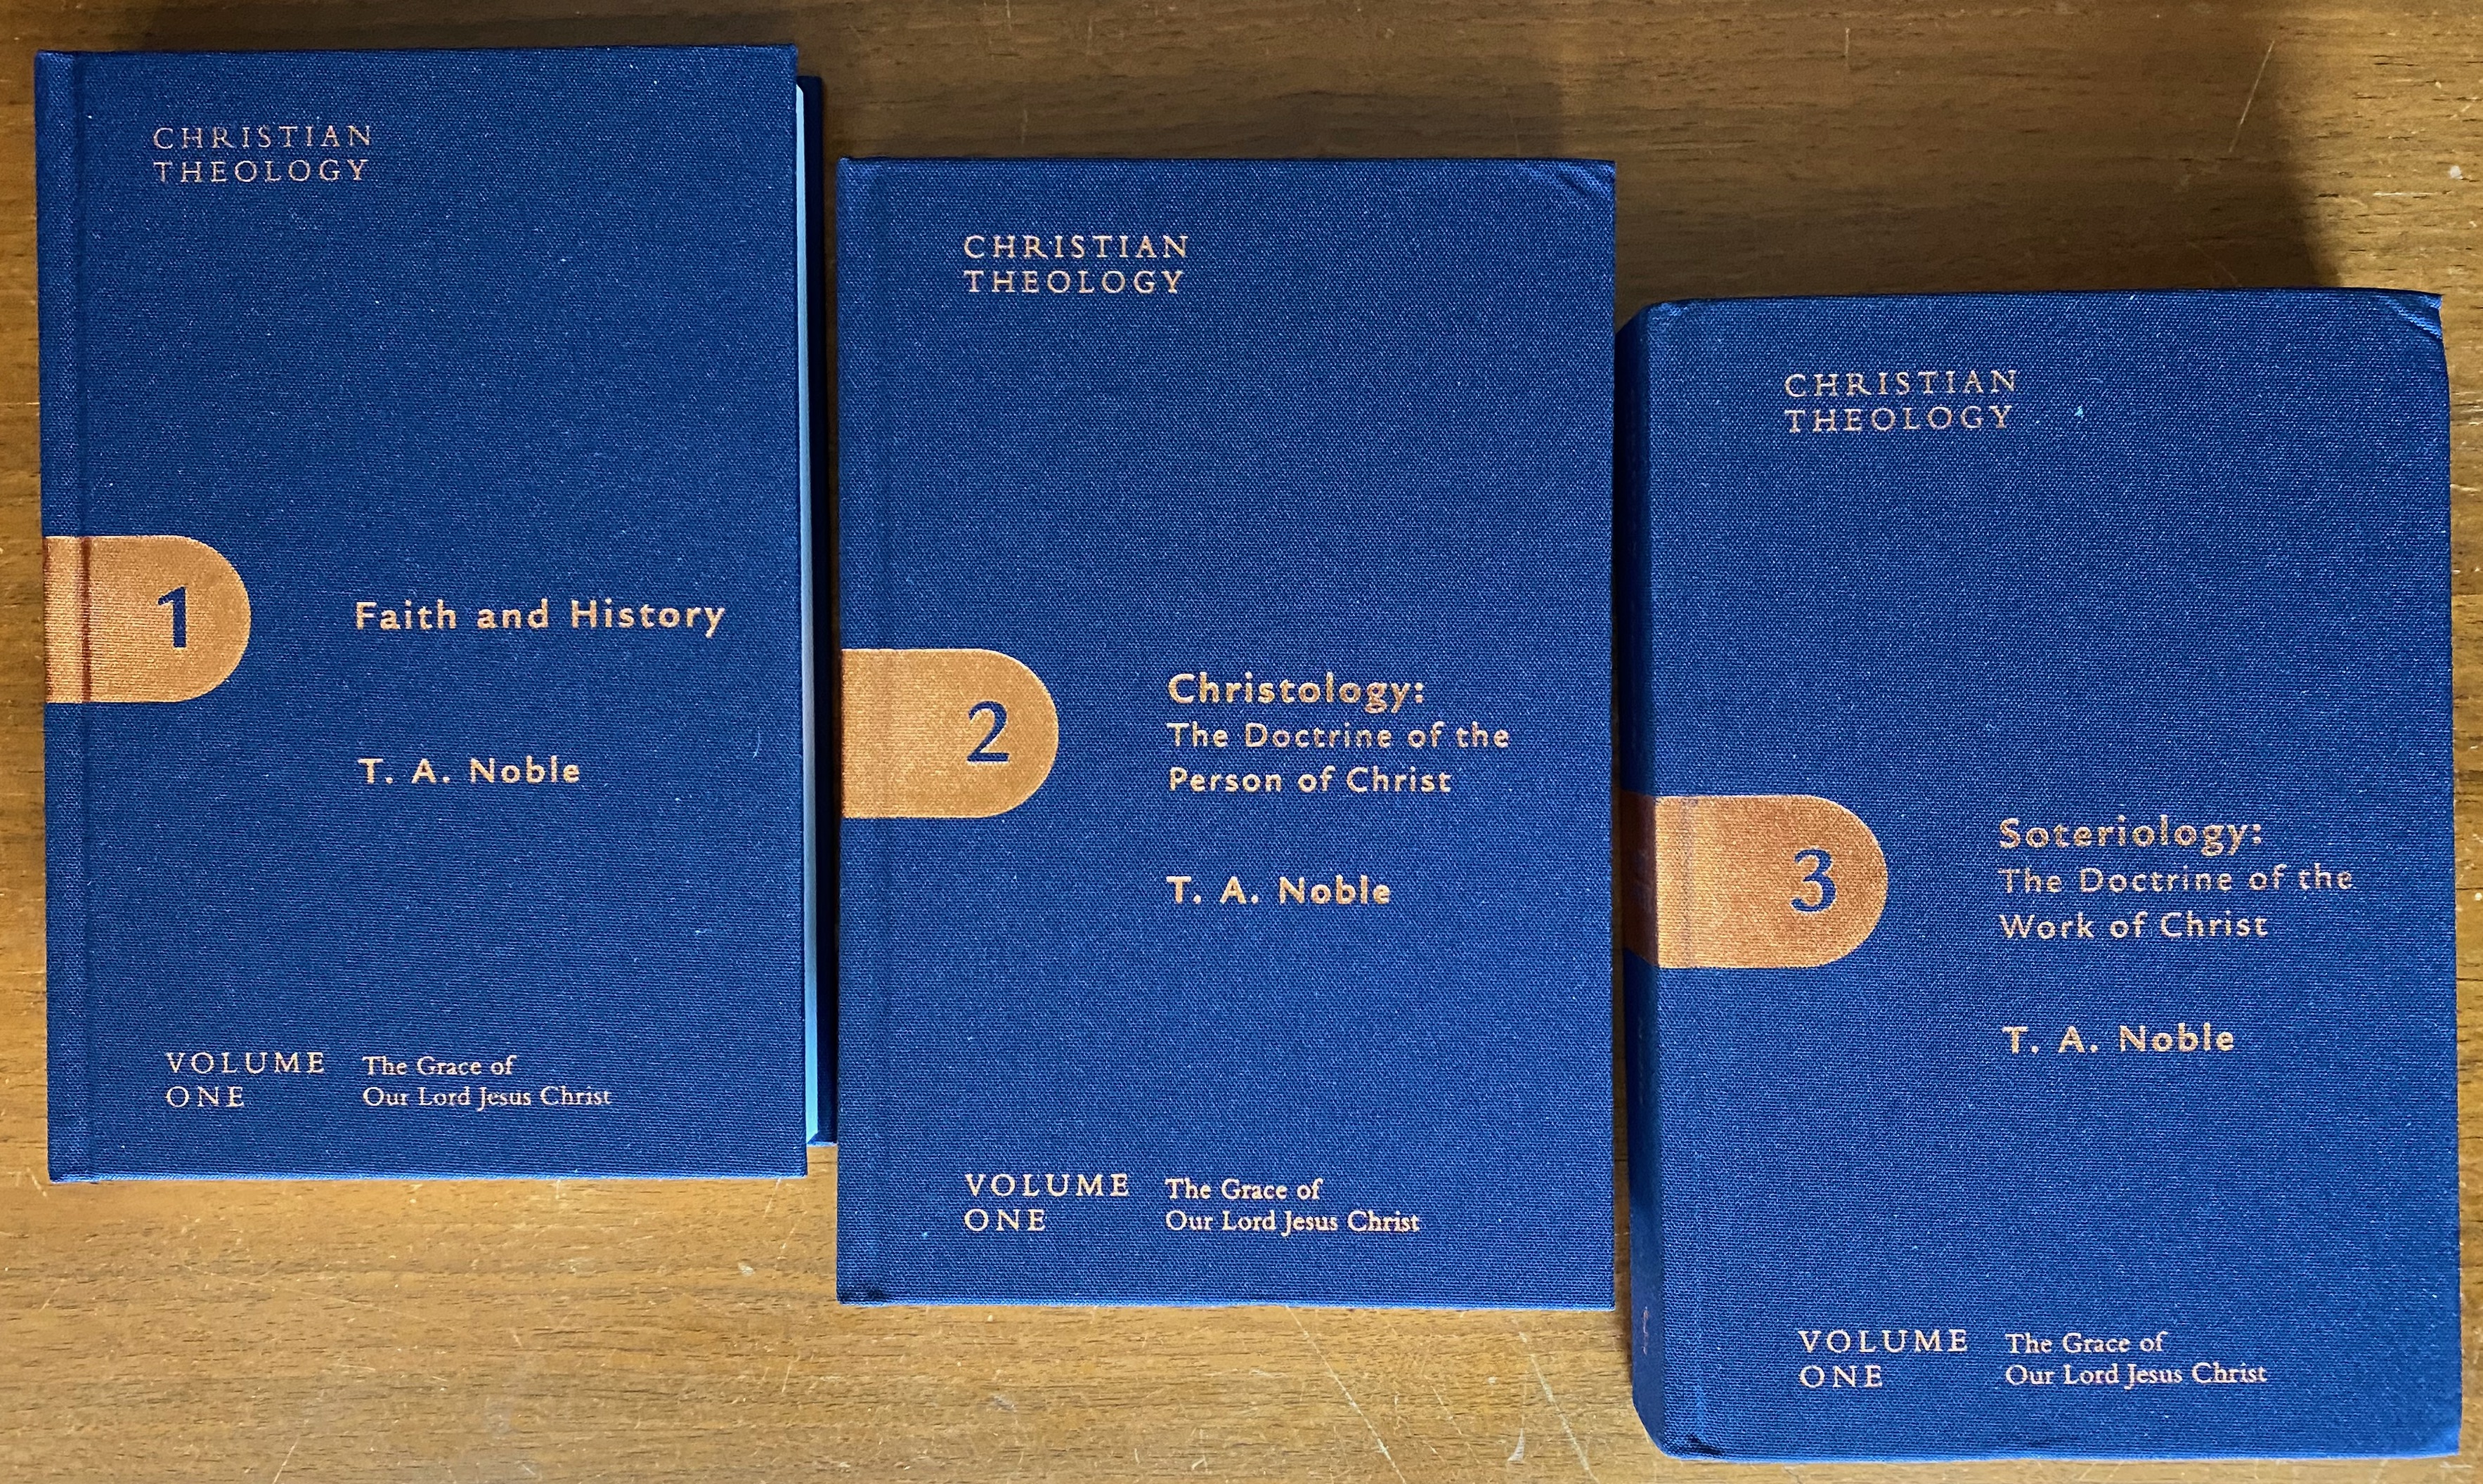 Thomas A. Noble, The Grace of Our Lord Jesus Christ, vol. 1 of Christian Theology, 3 vols. (Kansas City, Missouri: The Foundry Publishing, 2022). Covers of the three part volumes.